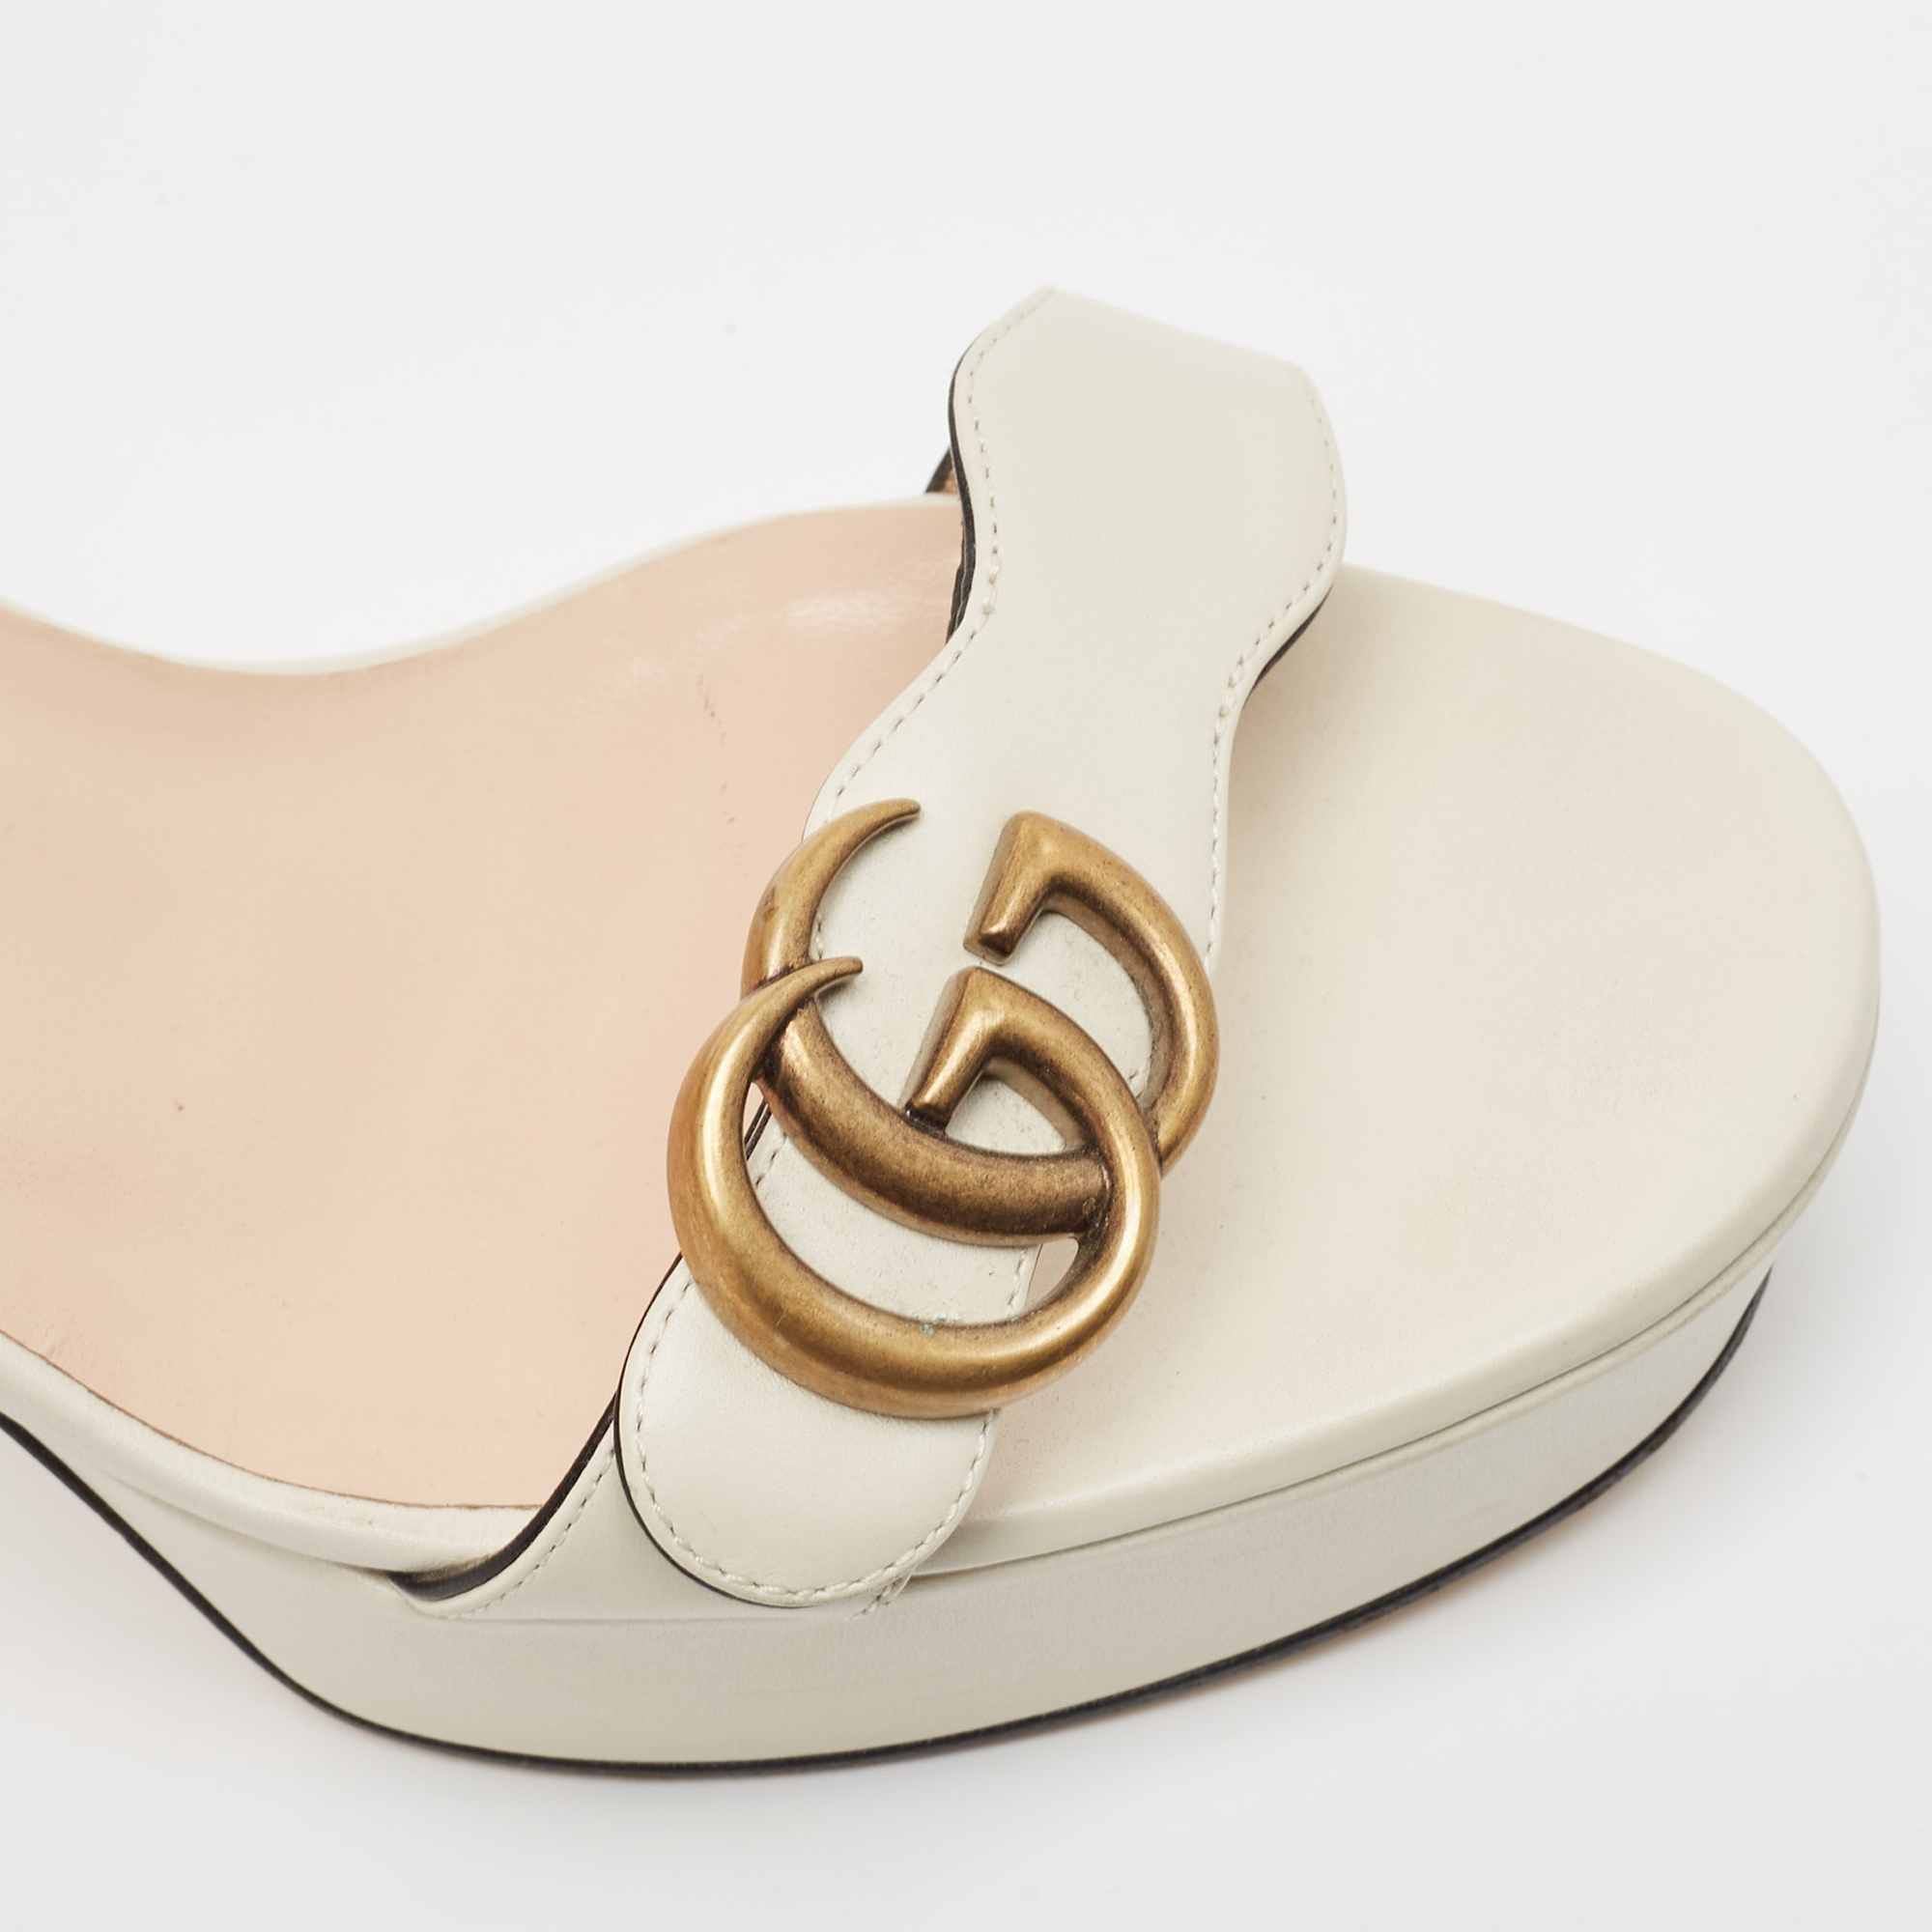 Gucci Cream Leather GG Marmont Ankle Strap Sandals Size 39